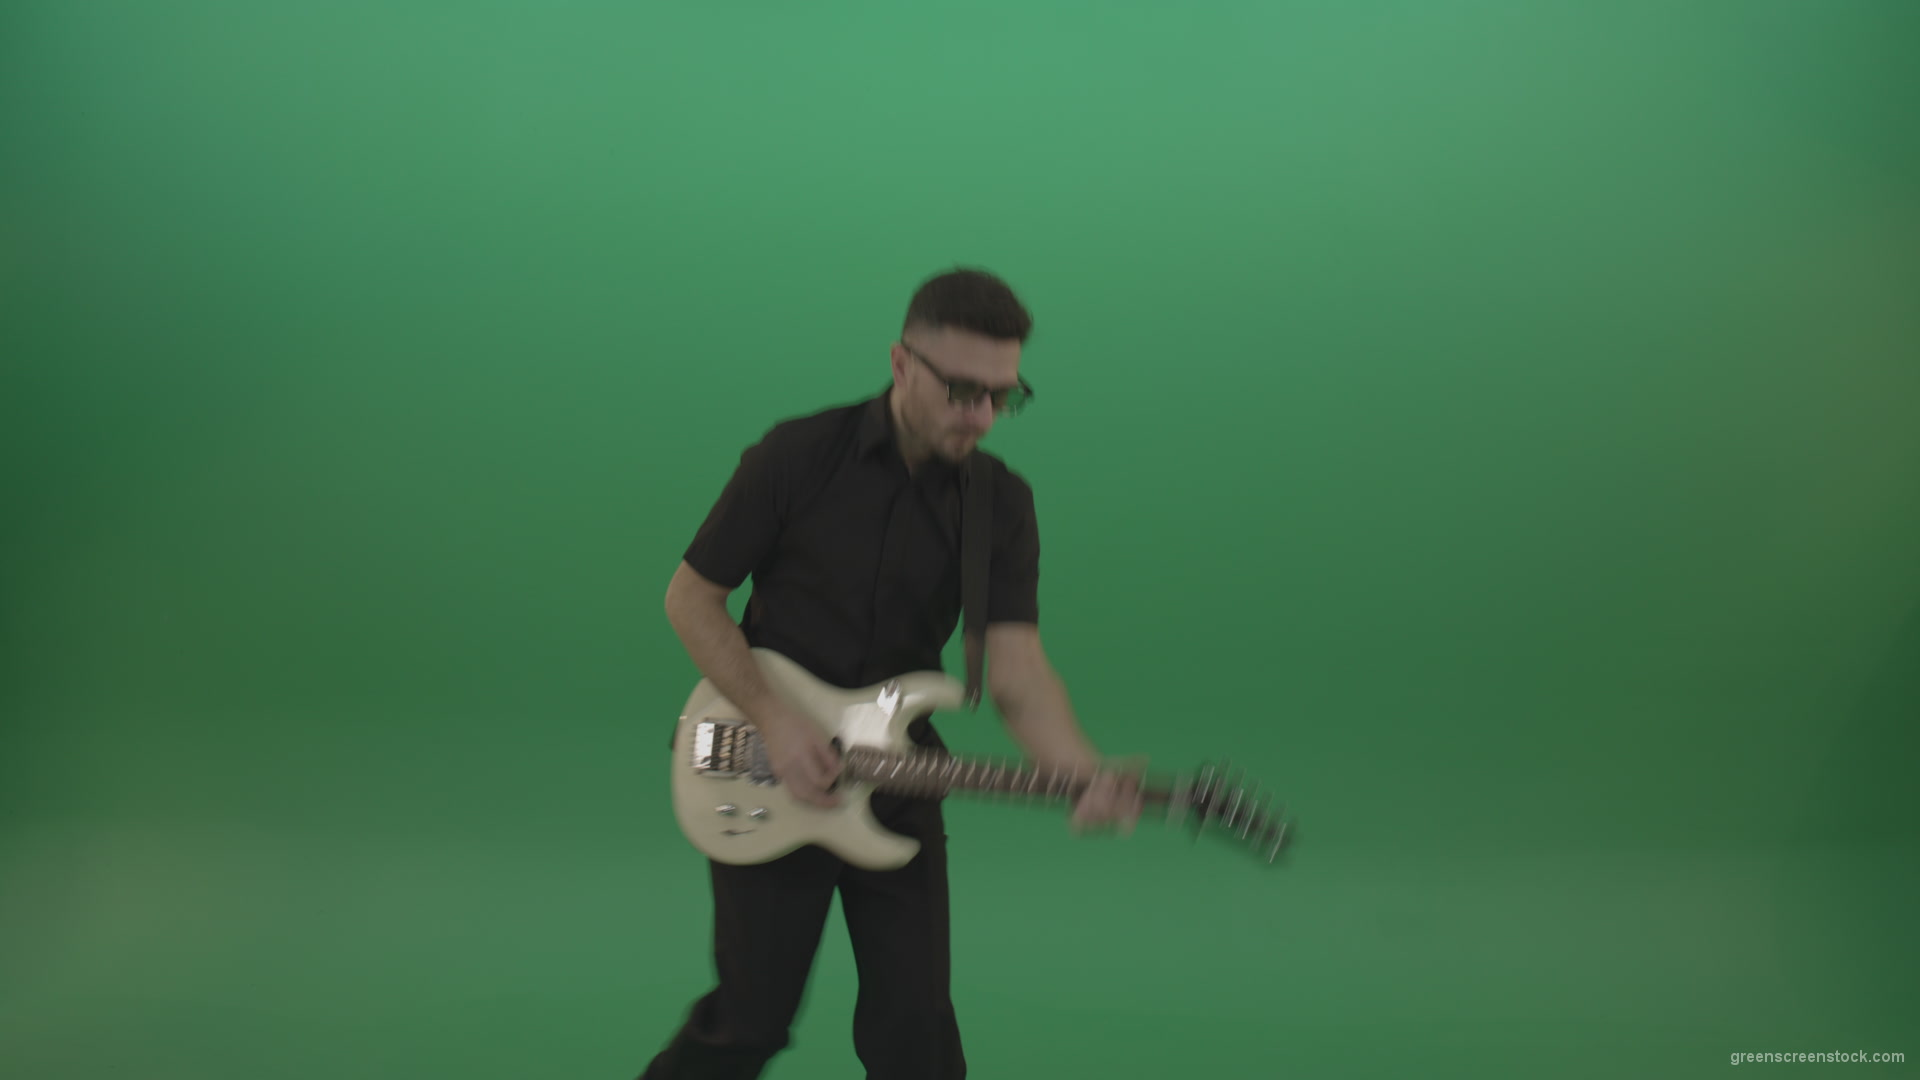 vj video background Man-in-black-costume-virtuoso-play-white-electro-rythm-guitar-isolated-on-green-screen_003